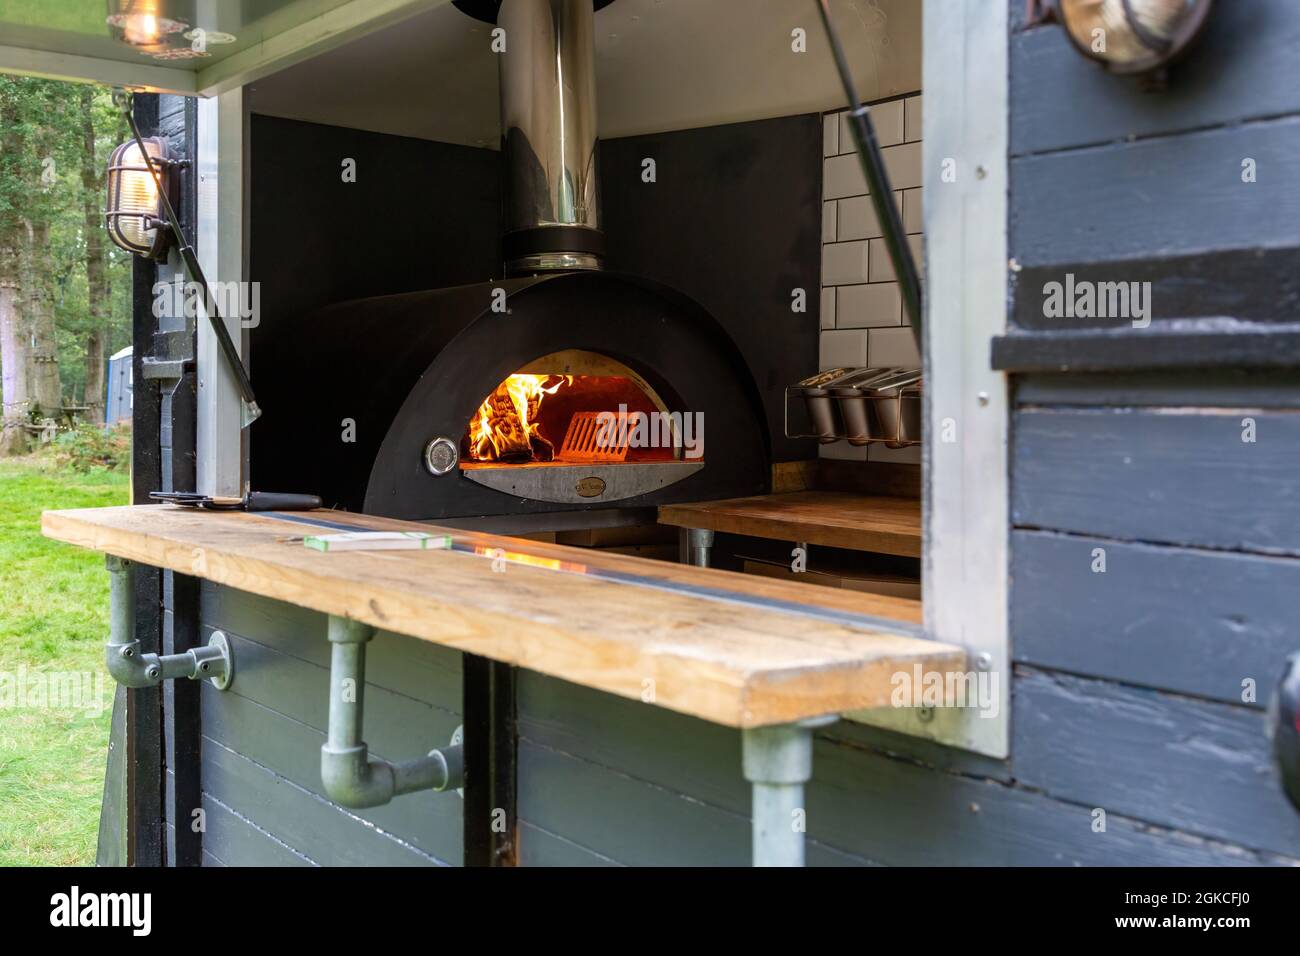 looking through a hatch of a mobile catering van with a pizza oven burning inside Stock Photo